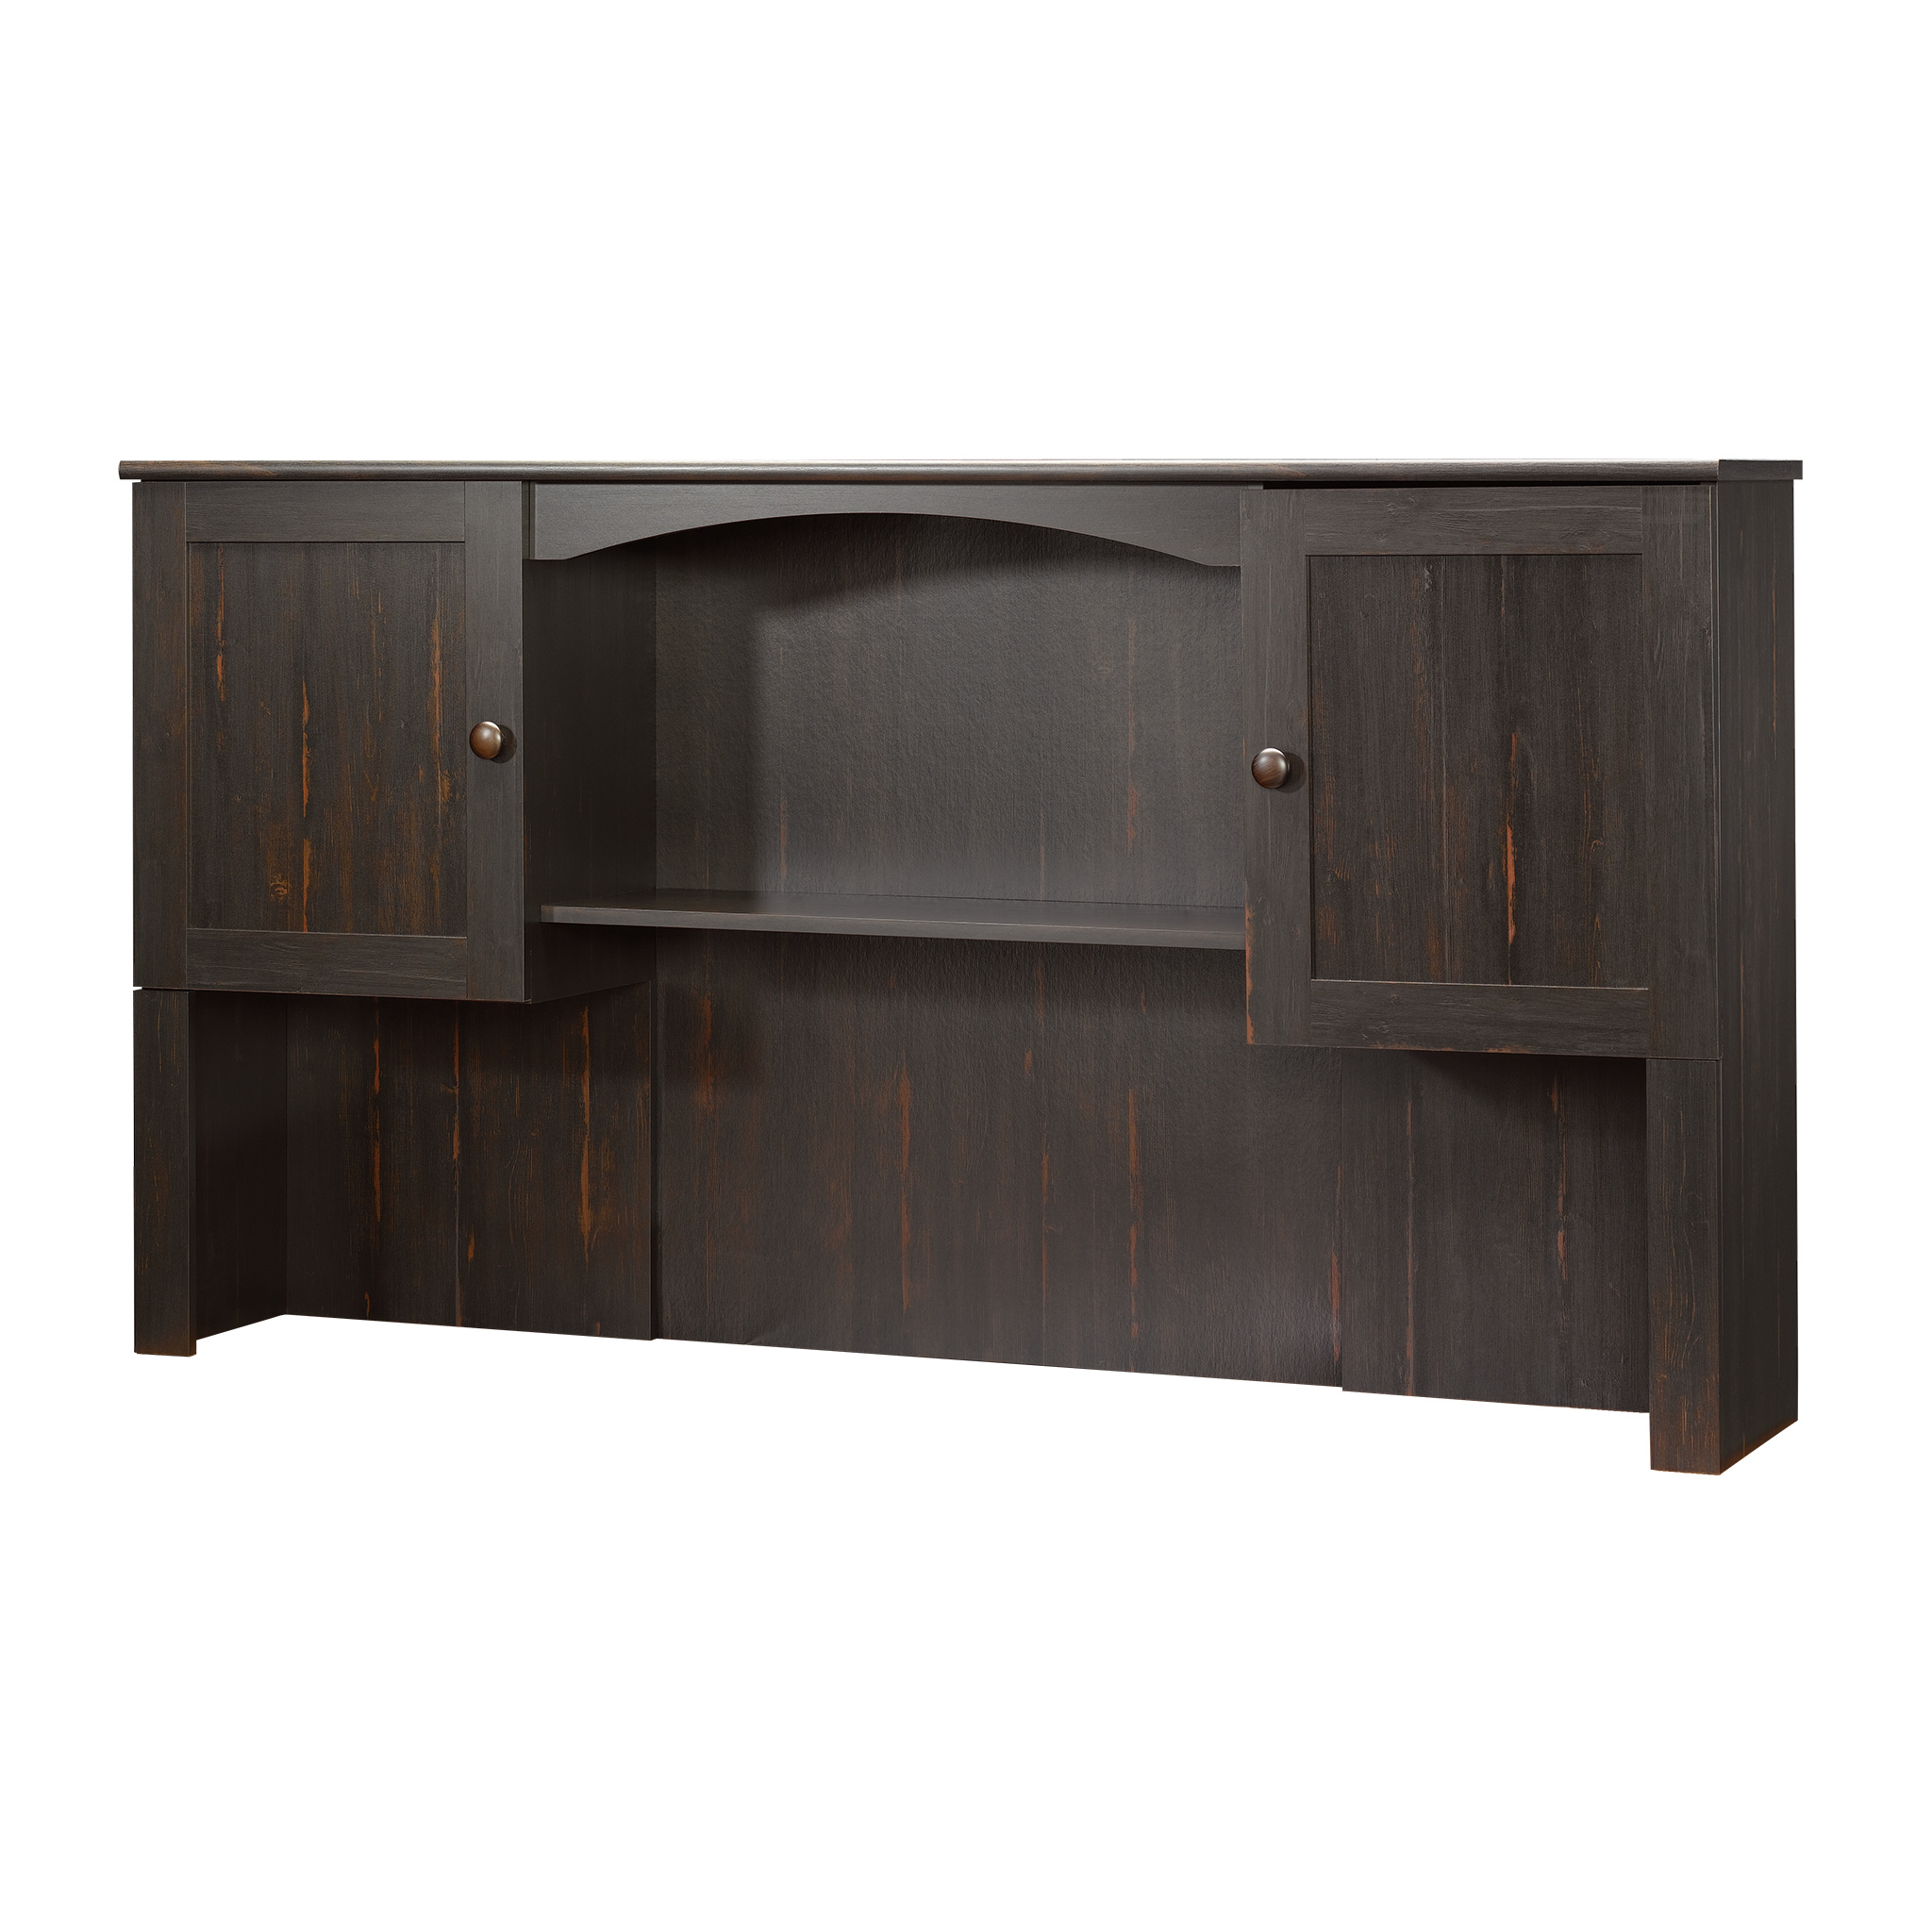 Sauder Harbor View Hutch, Antiqued Paint Finish - image 1 of 6